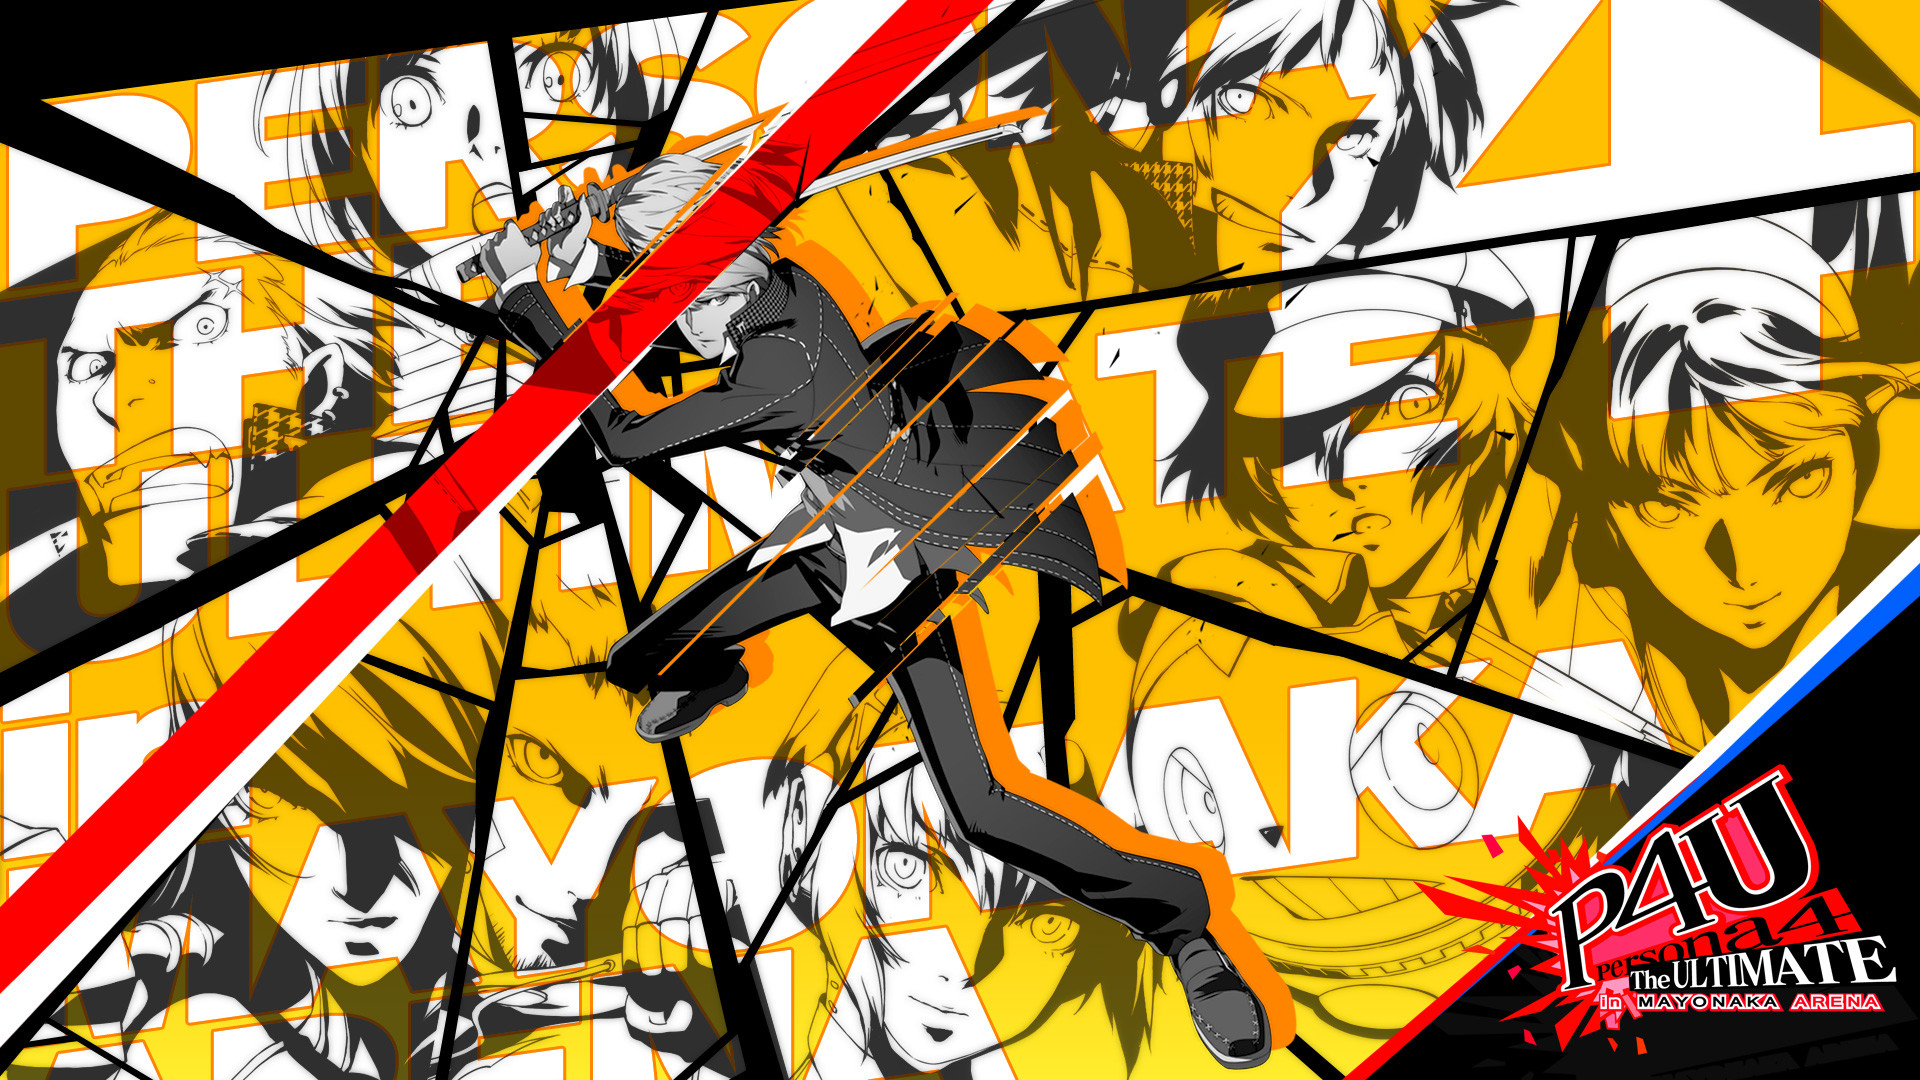 1920x1080 ... download Persona 4: The Ultimate In Mayonaka Arena image